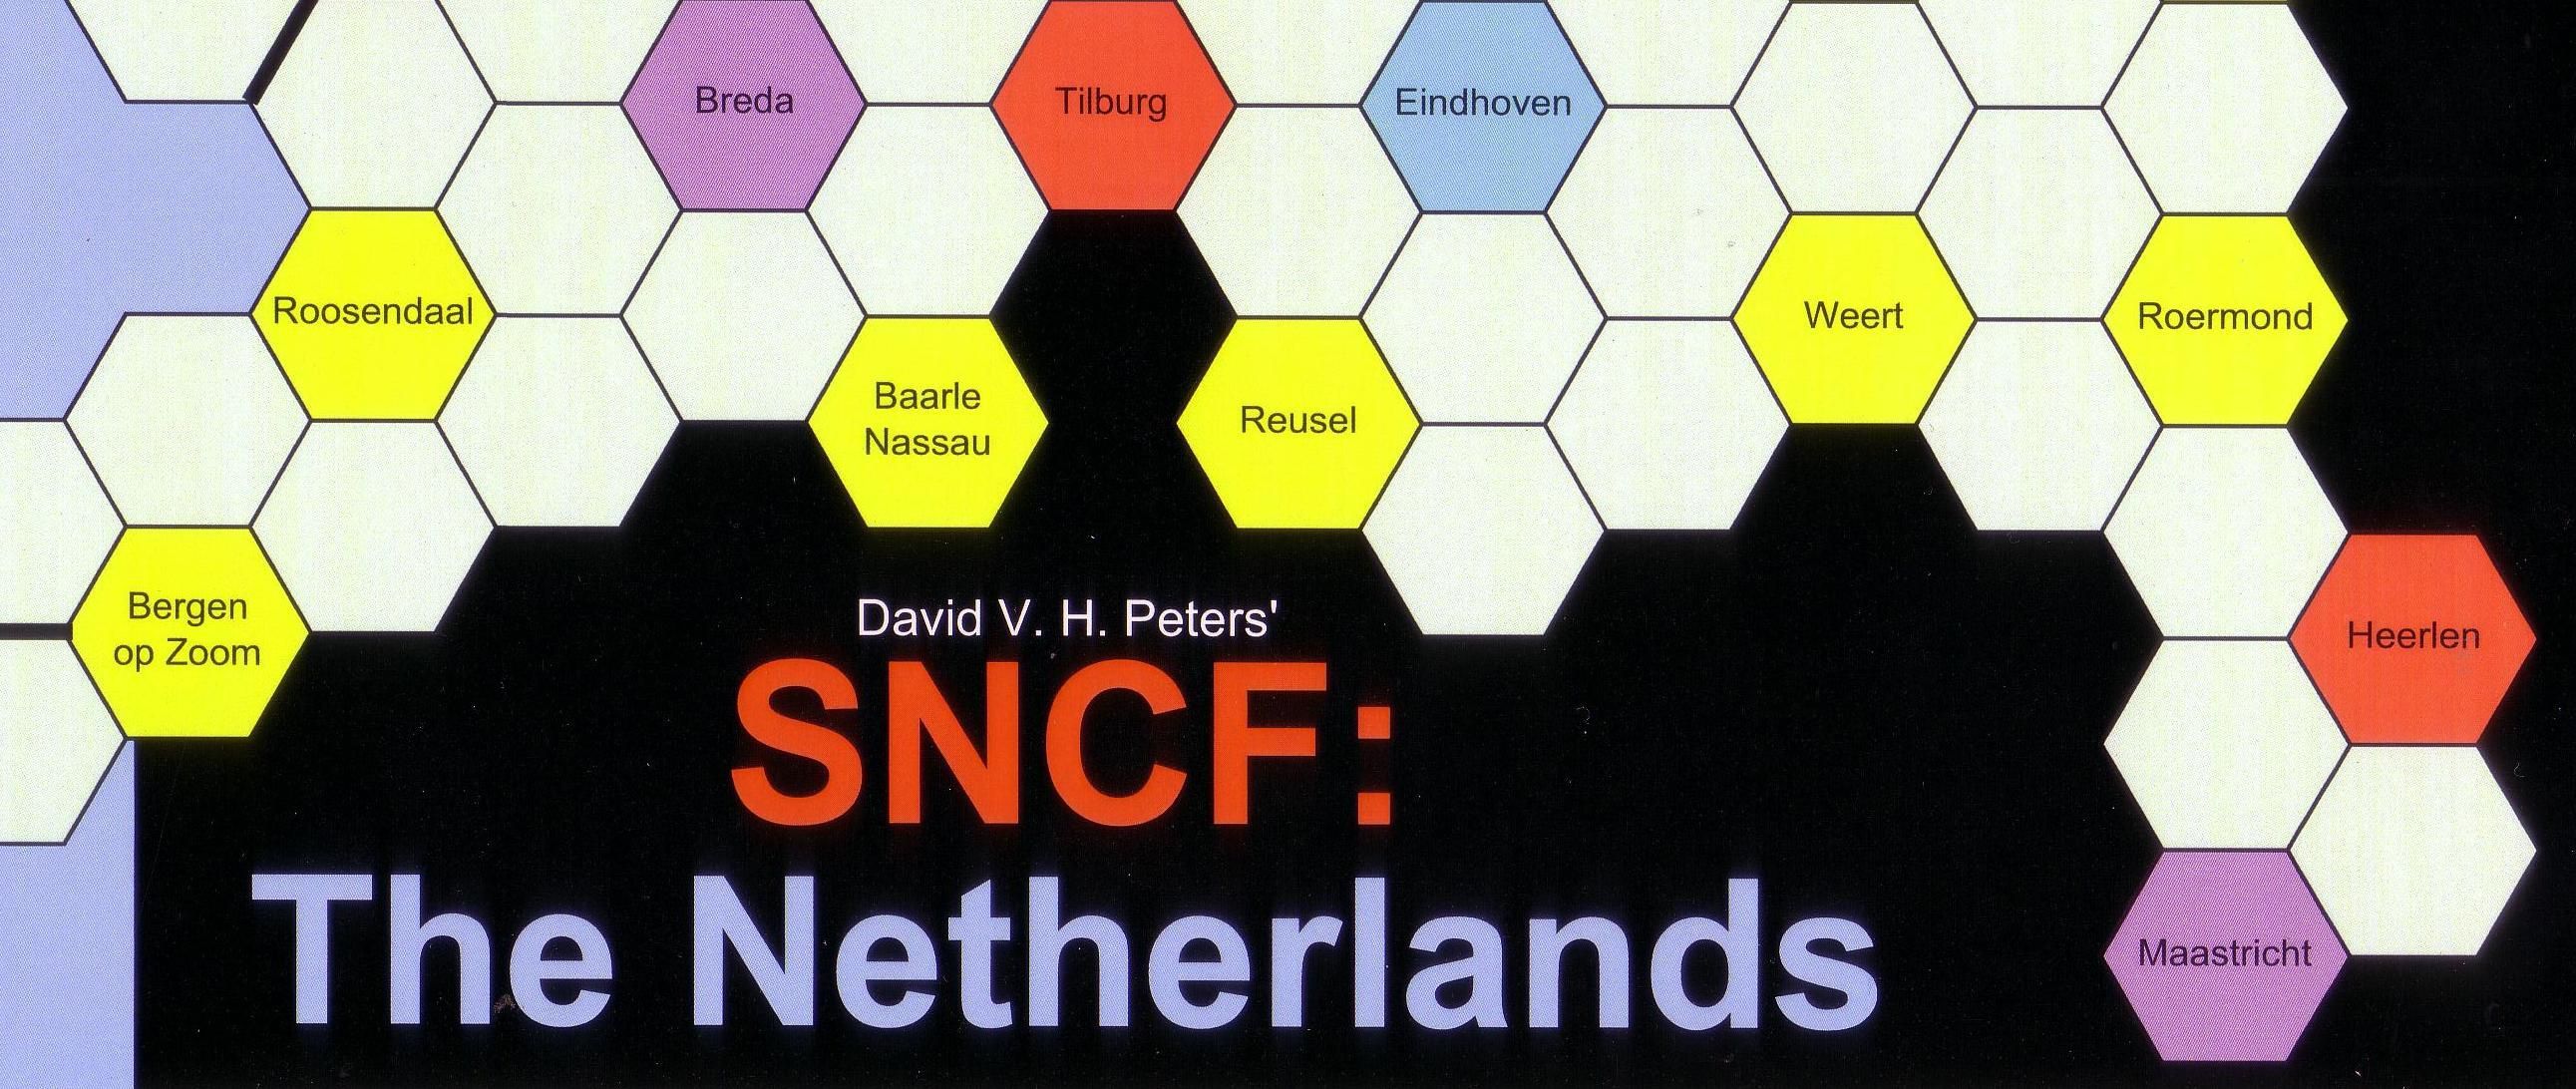 SNCF: The Netherlands